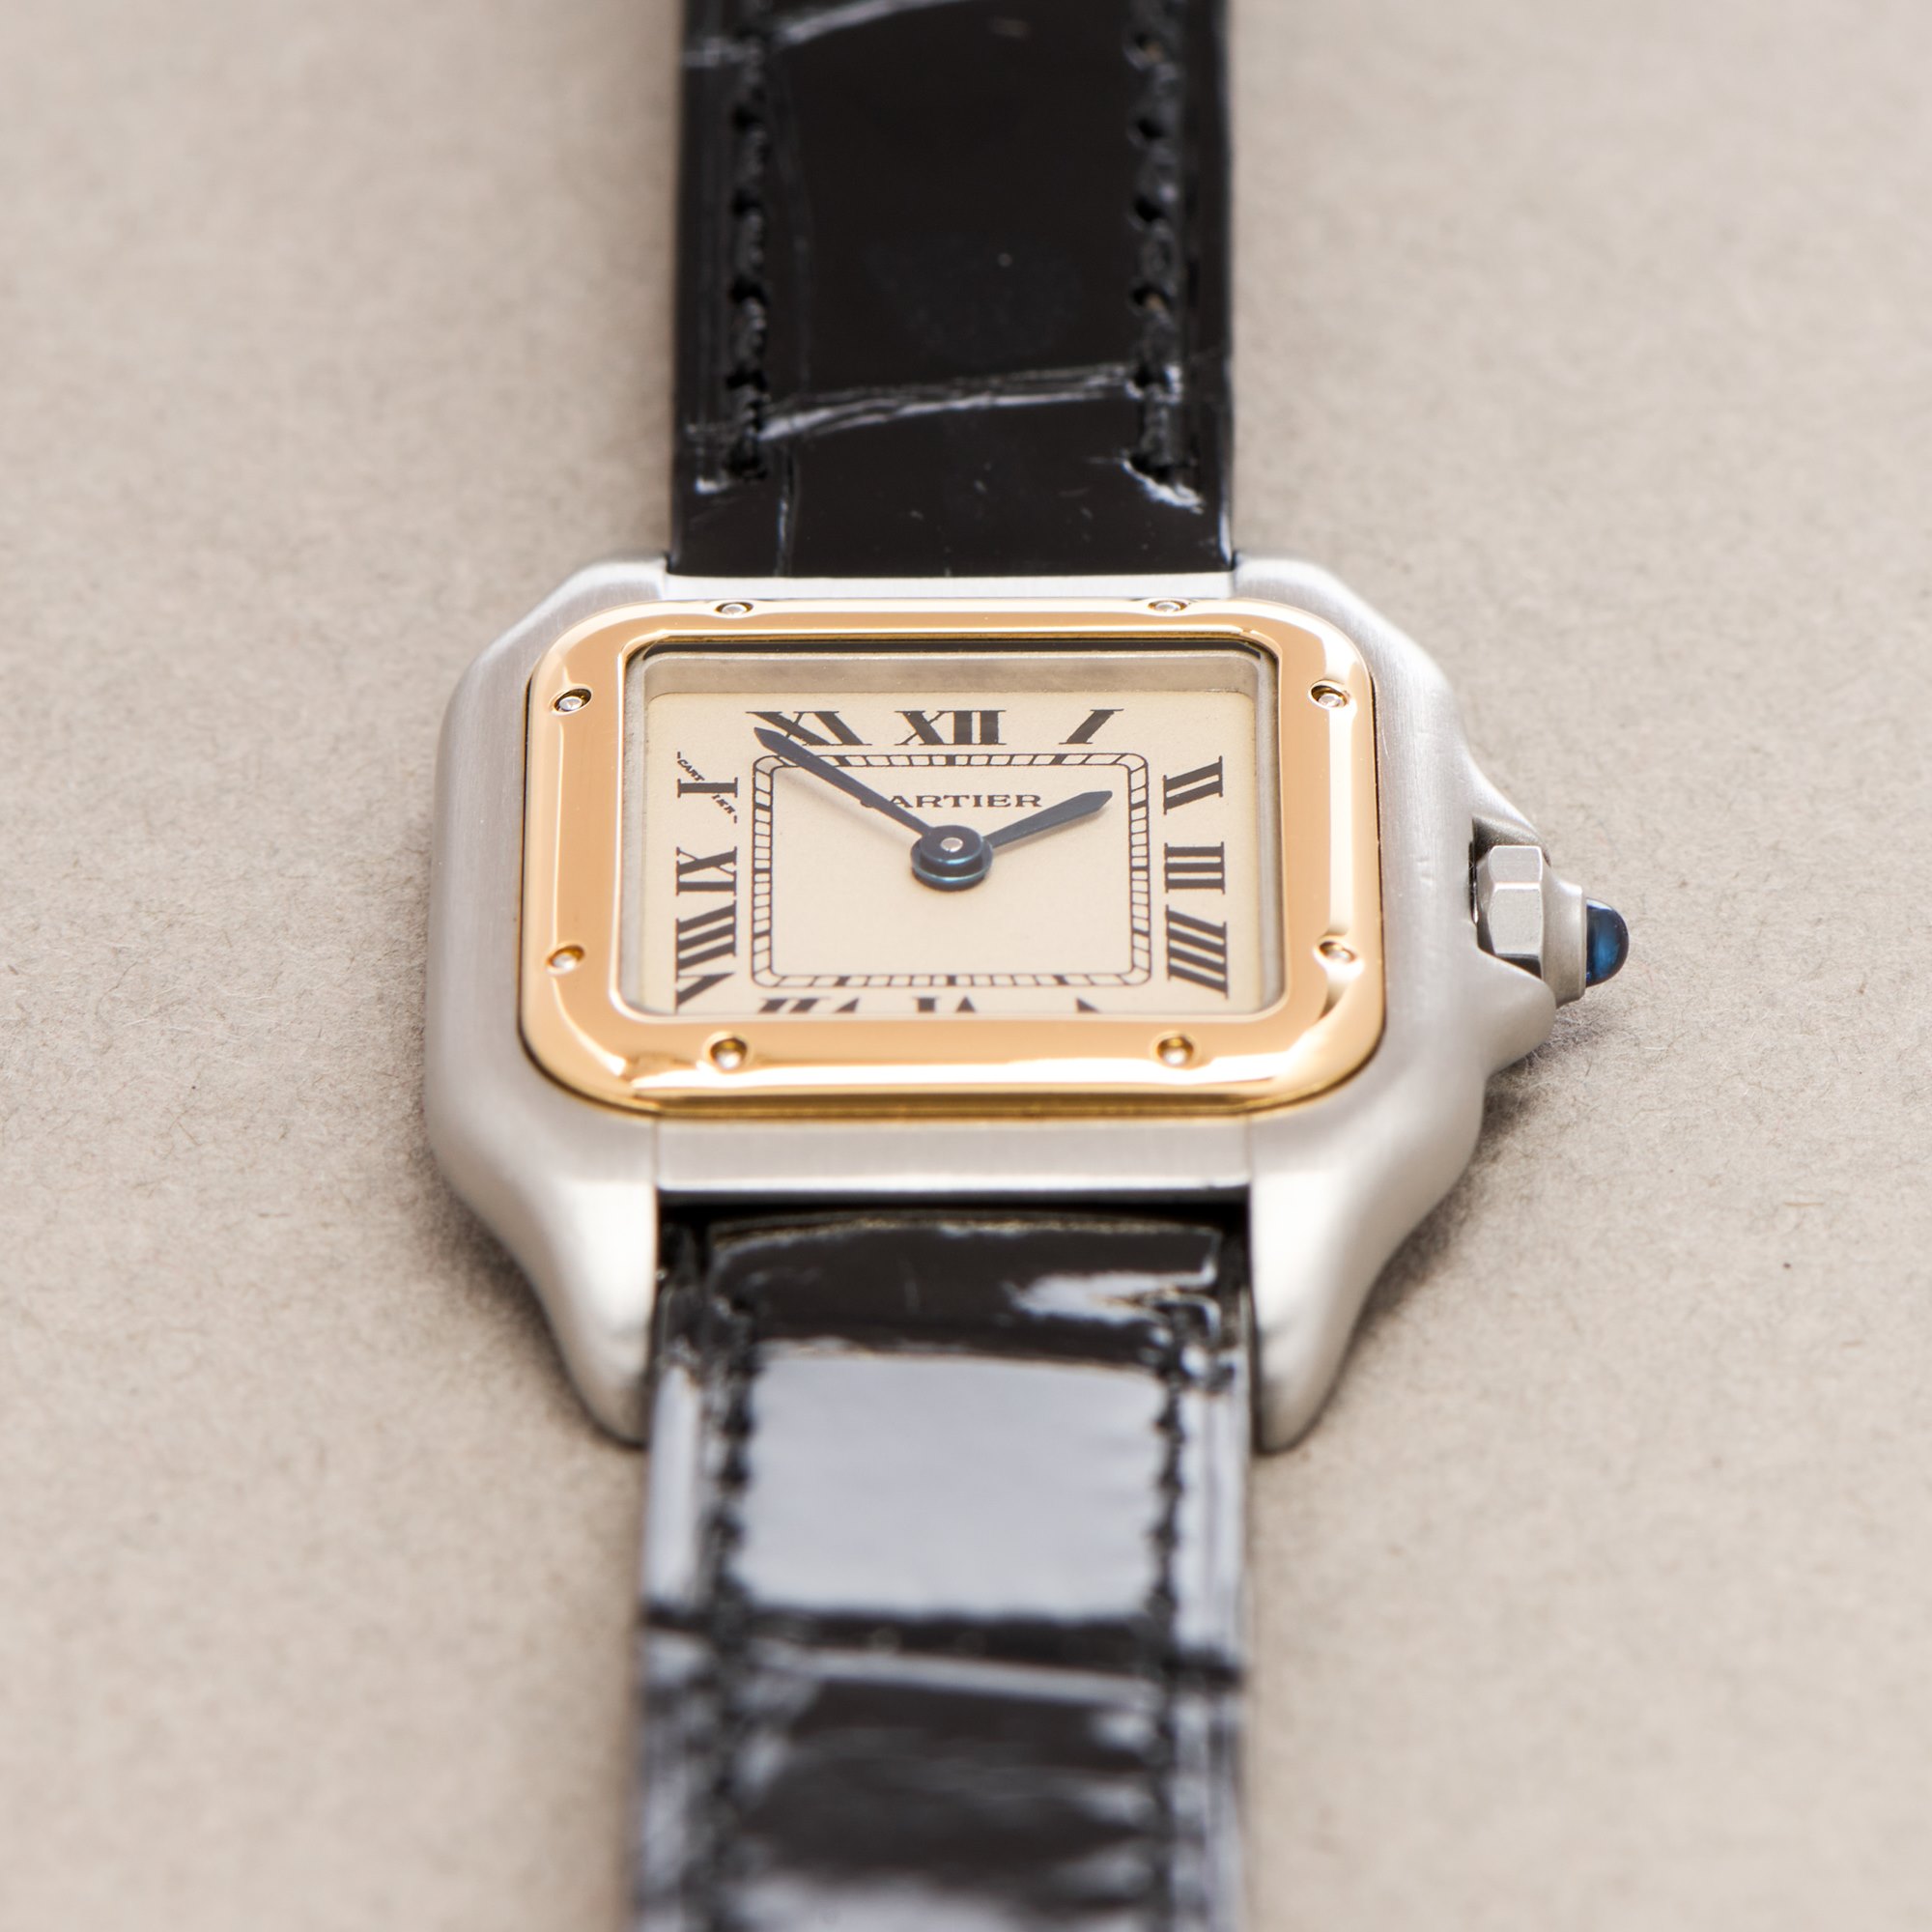 Cartier Panthère 18K Yellow Gold & Stainless Steel W250295A or 1120